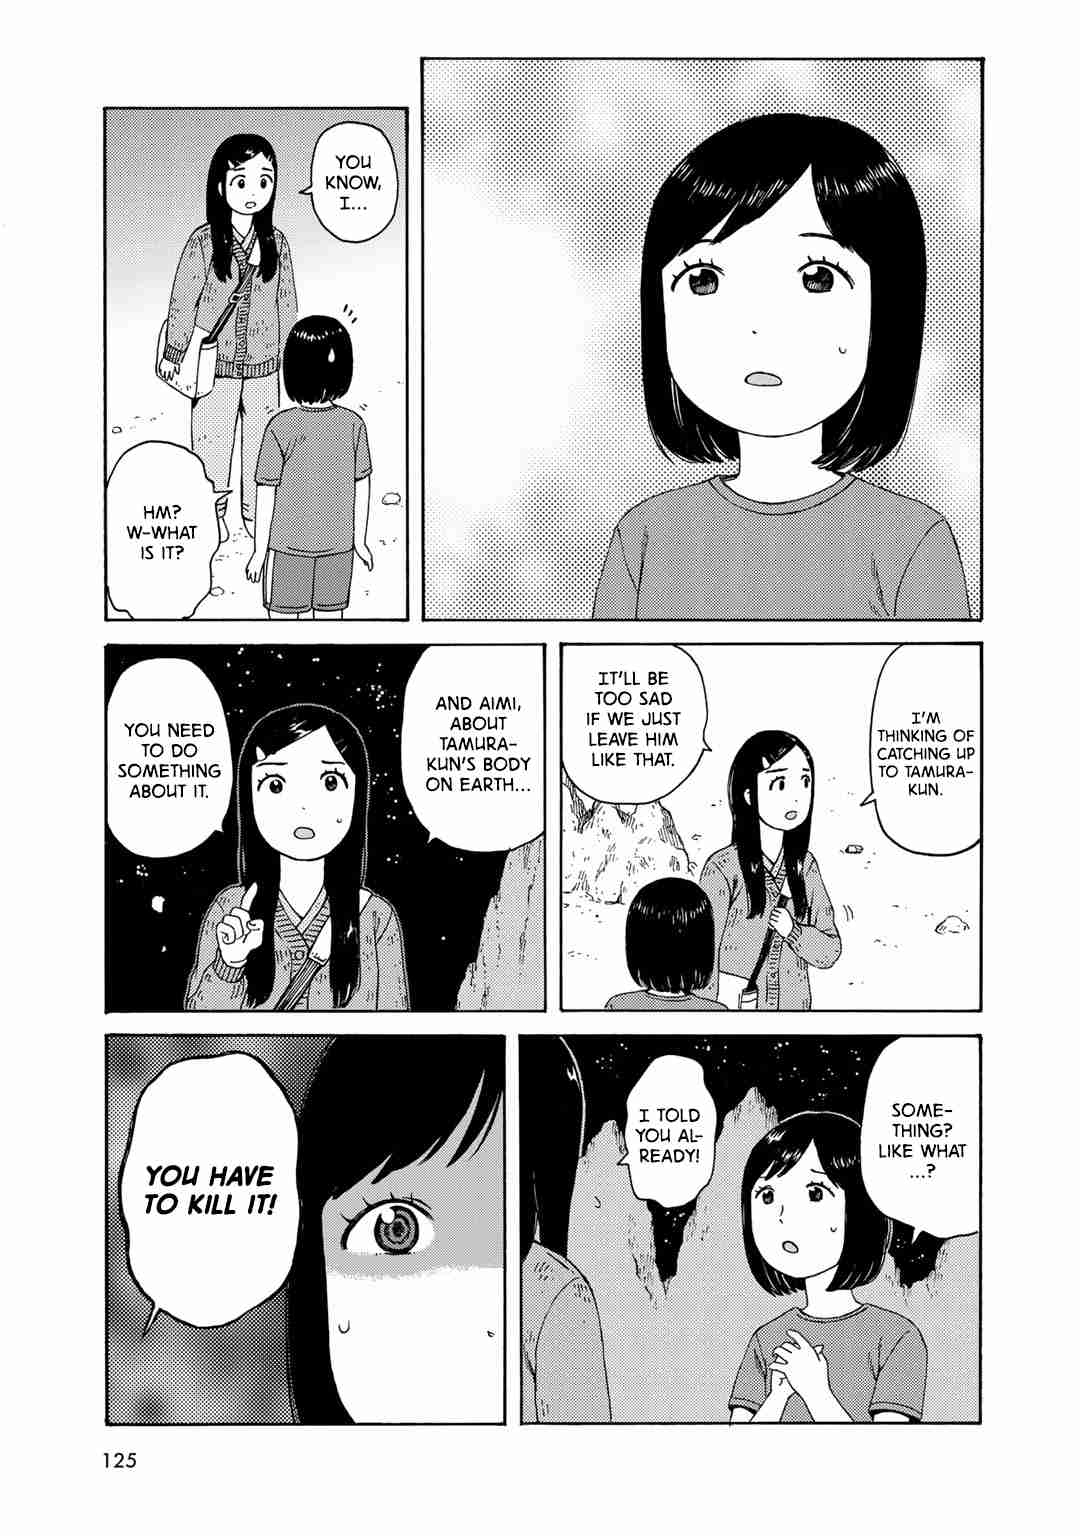 Wakusei Closet Vol. 1 Ch. 6 If Only It Was Just a Dream